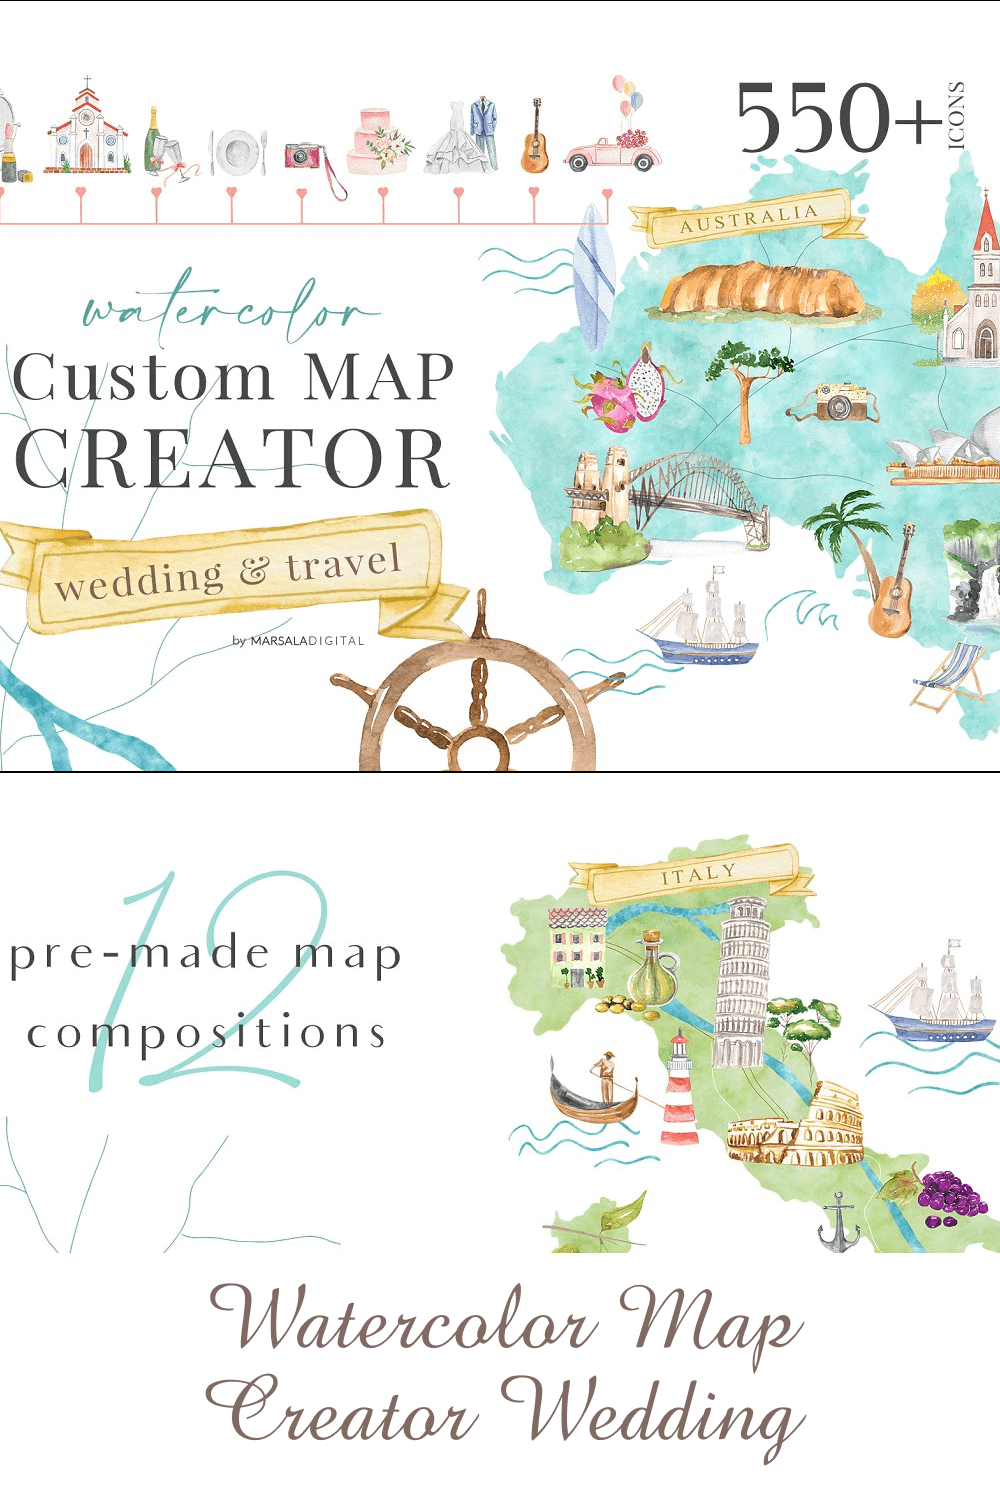 12 Pre-made Map Composition Watercolor Map Creator.